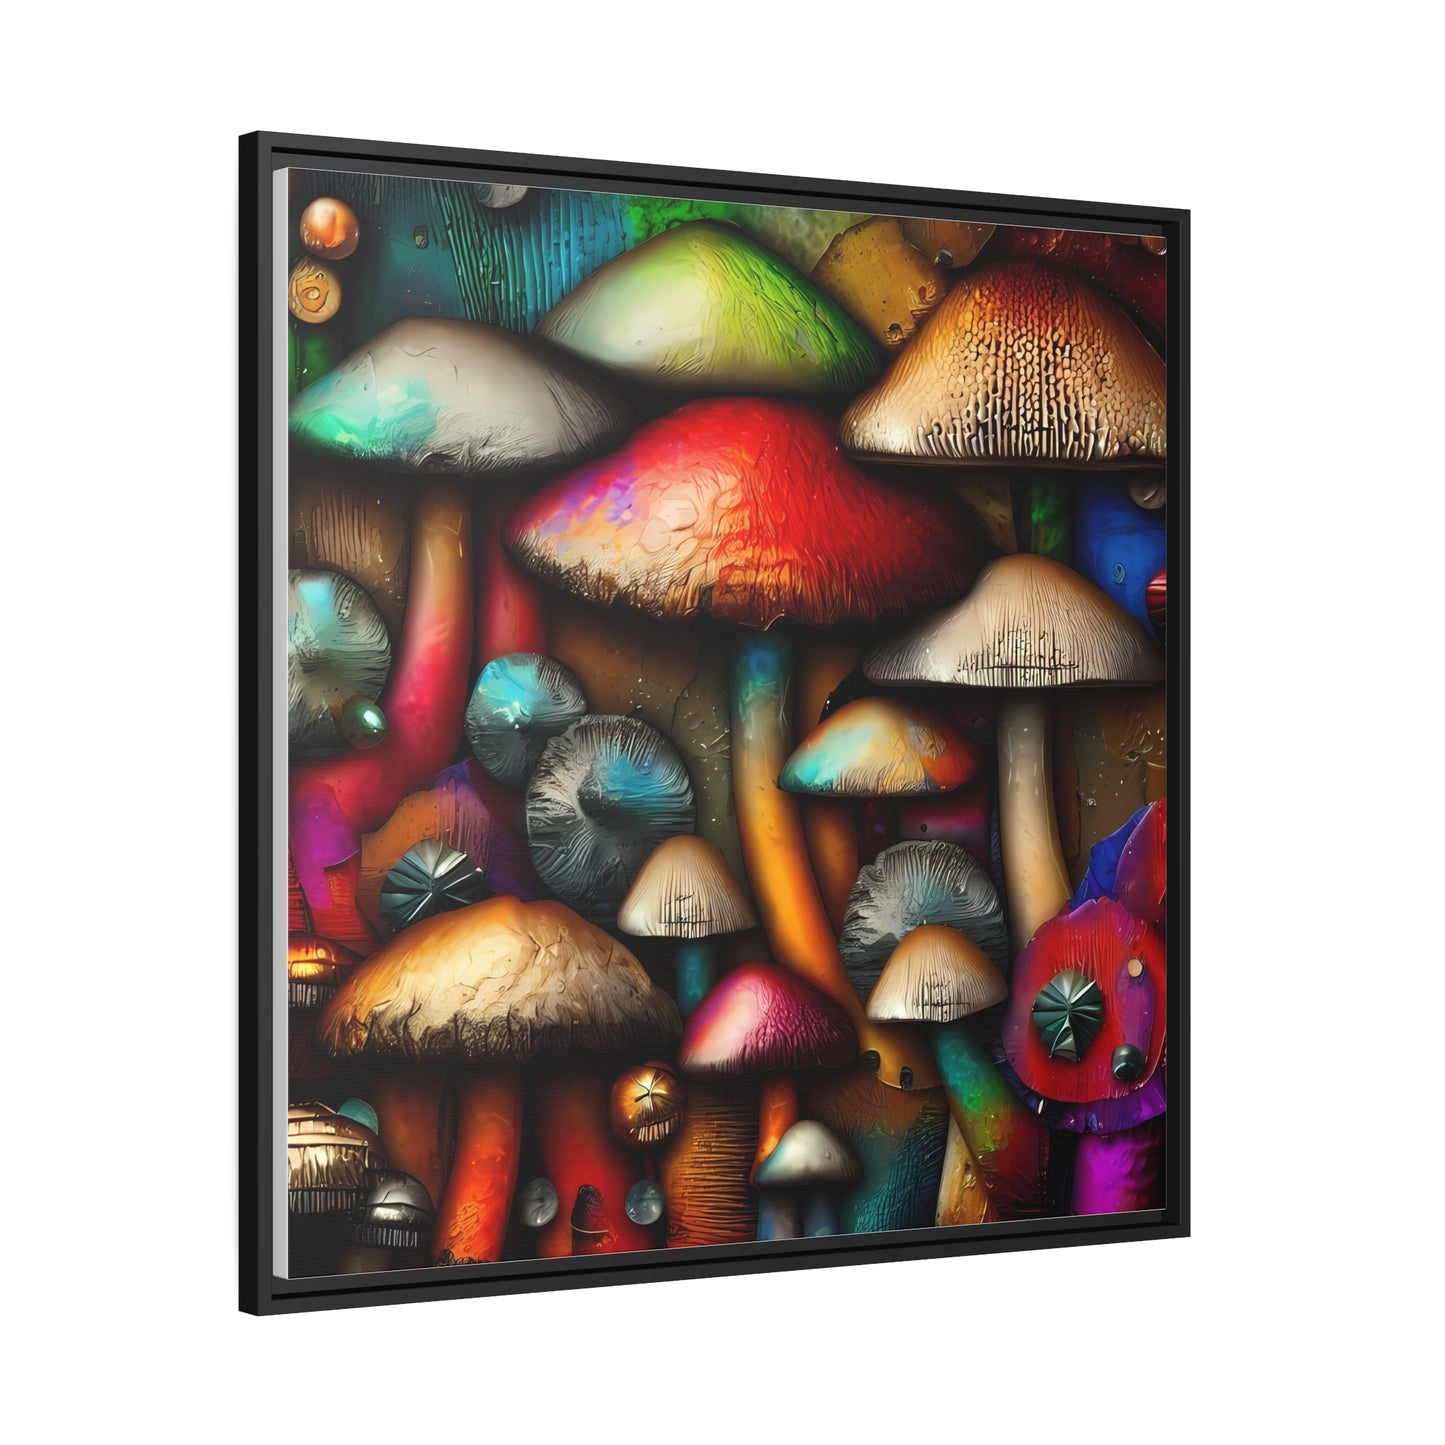 Home Decor Matte Canvas Wall Art, Black Frame - Wildshrooms - Fathers Day Gift Item Special